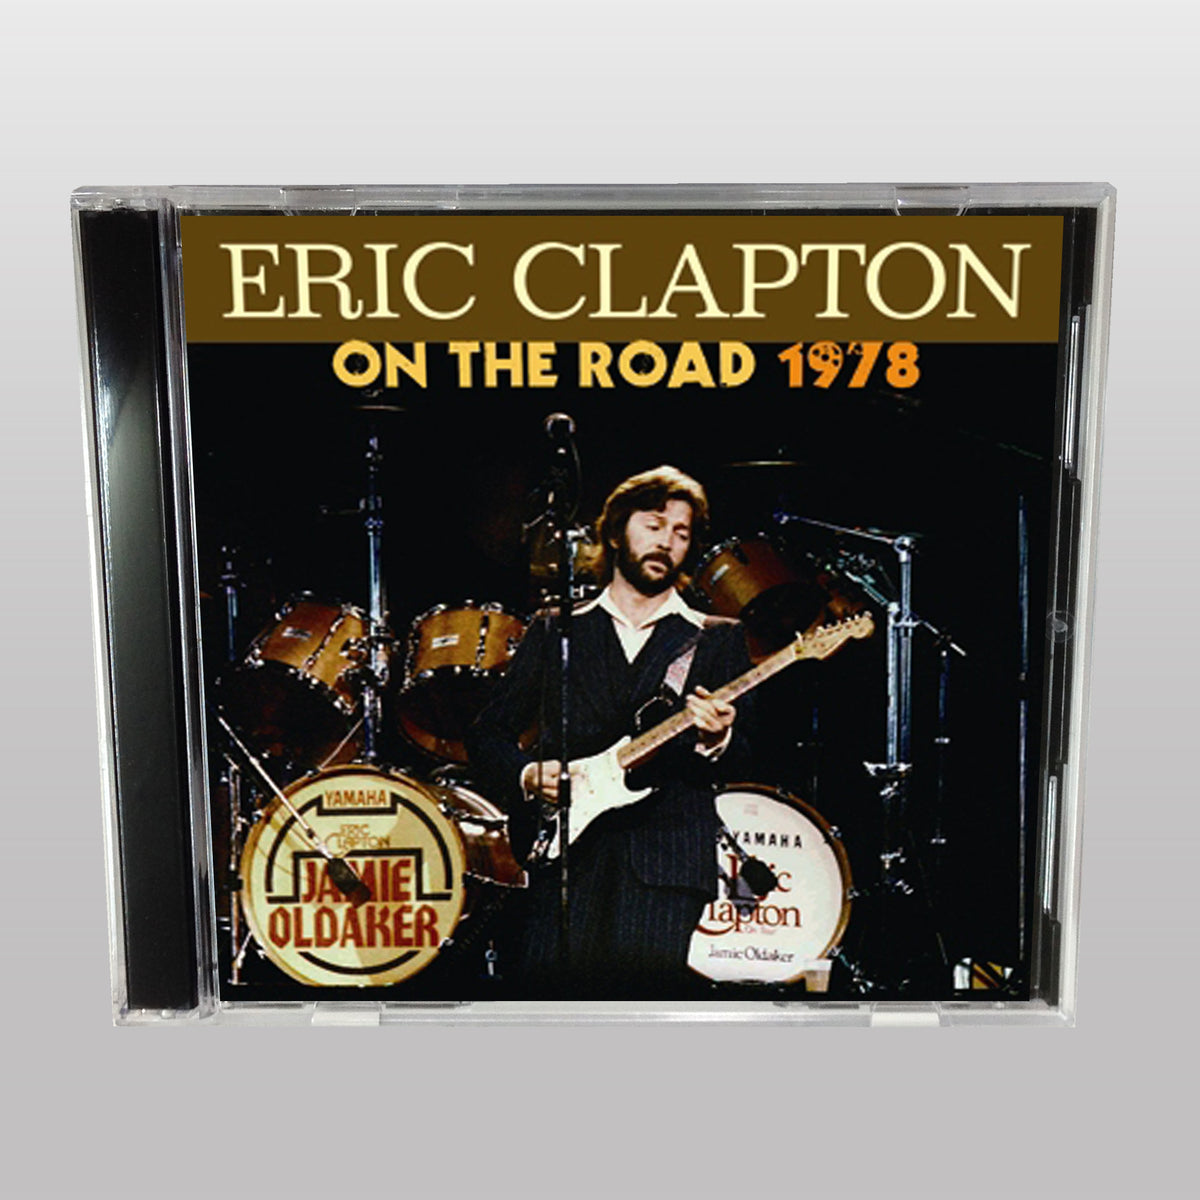 ERIC CLAPTON - ON THE ROAD 1978 – Acme Hot Disc